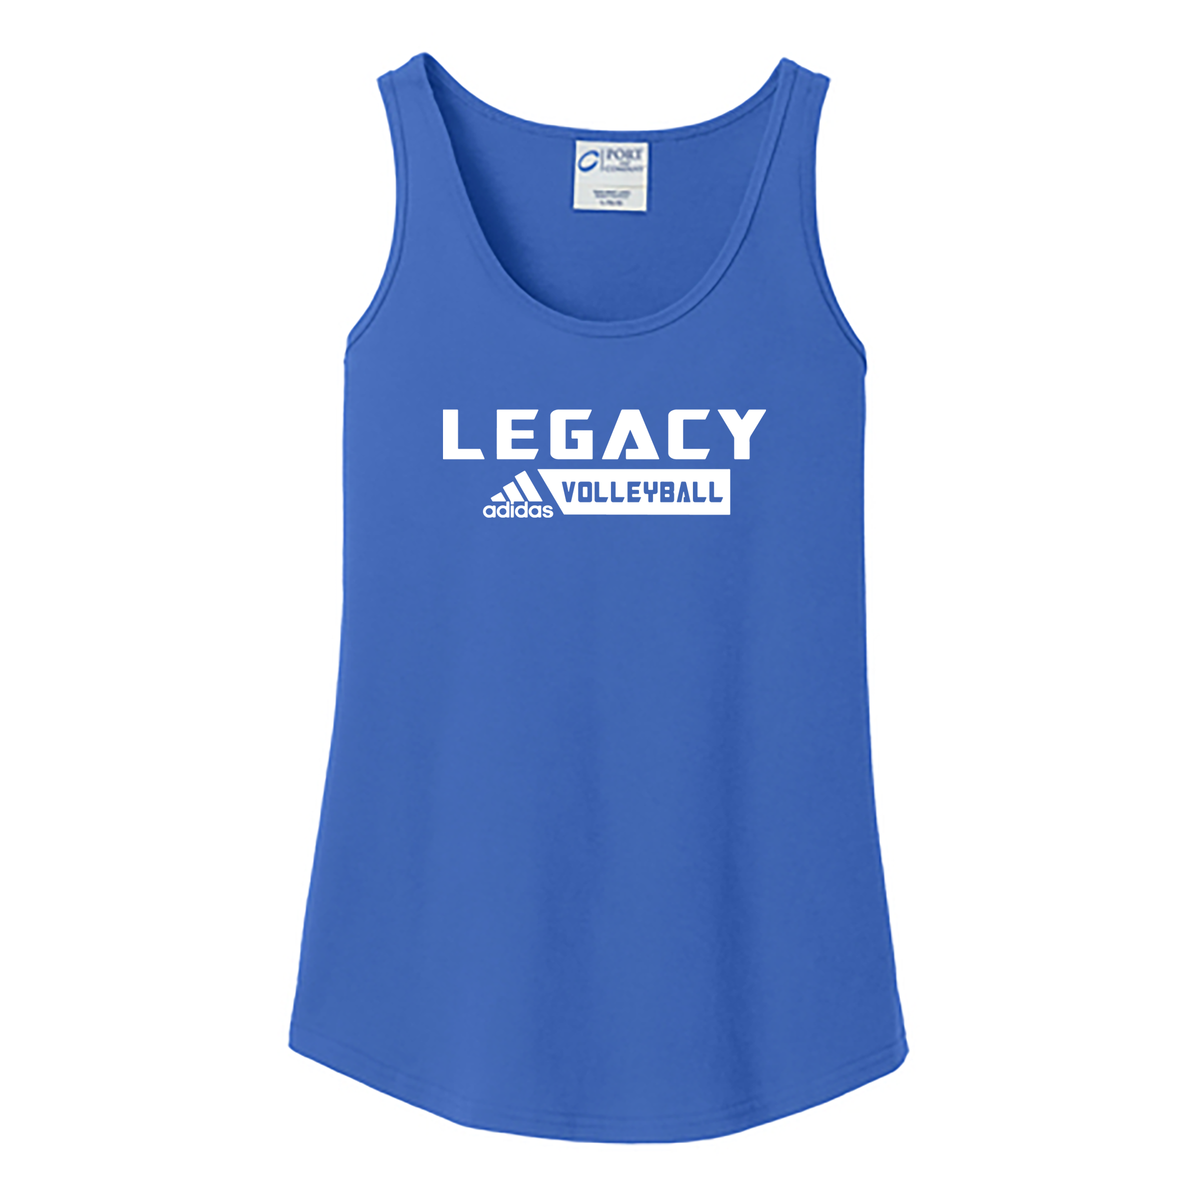 Legacy Volleyball Club Women's Tank Top